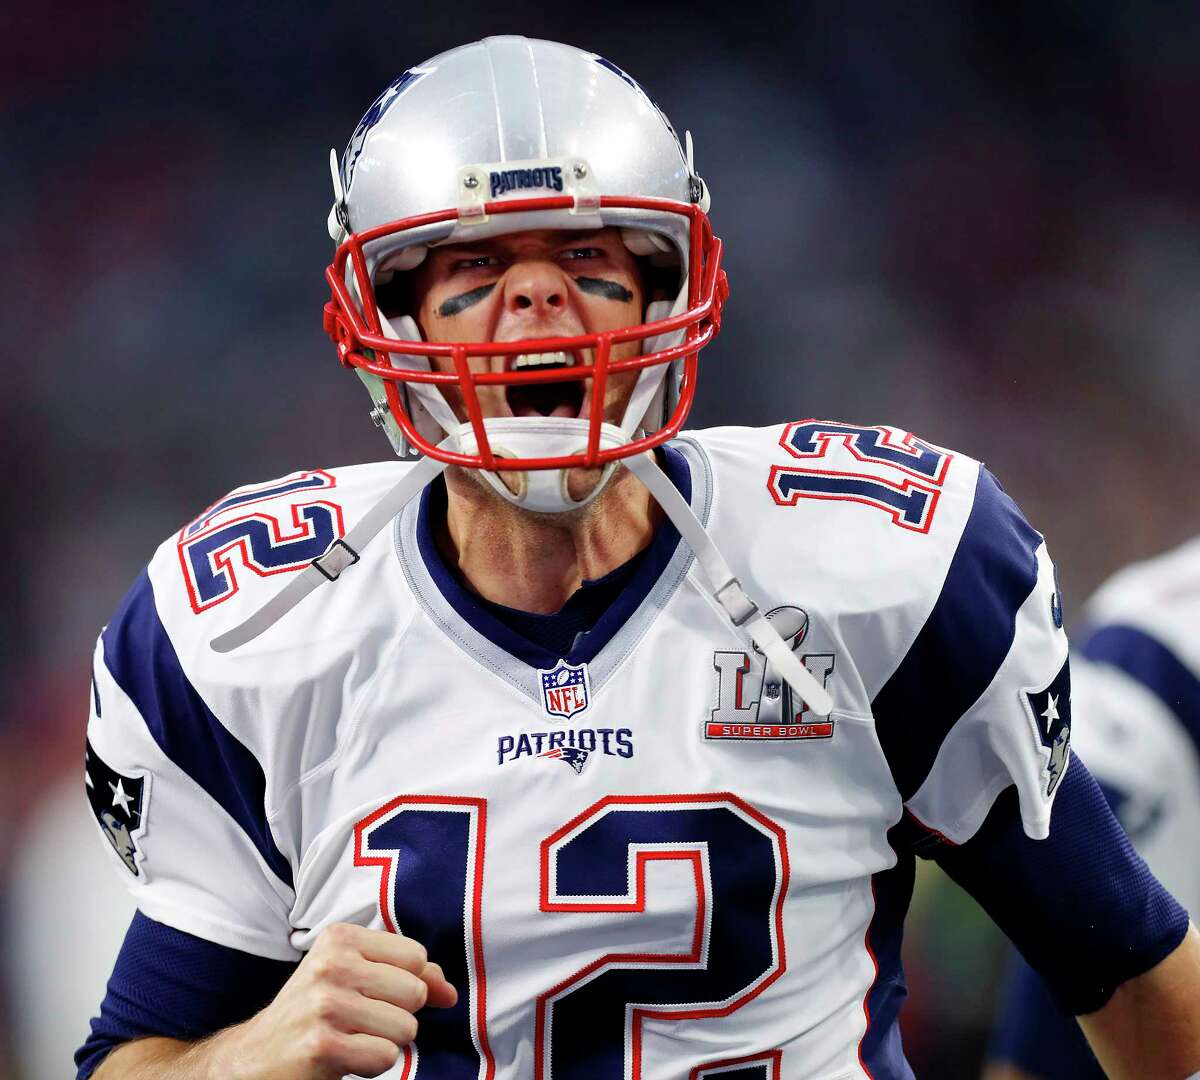 Tom Brady - Good luck to the Celtics in the 2015 playoffs!